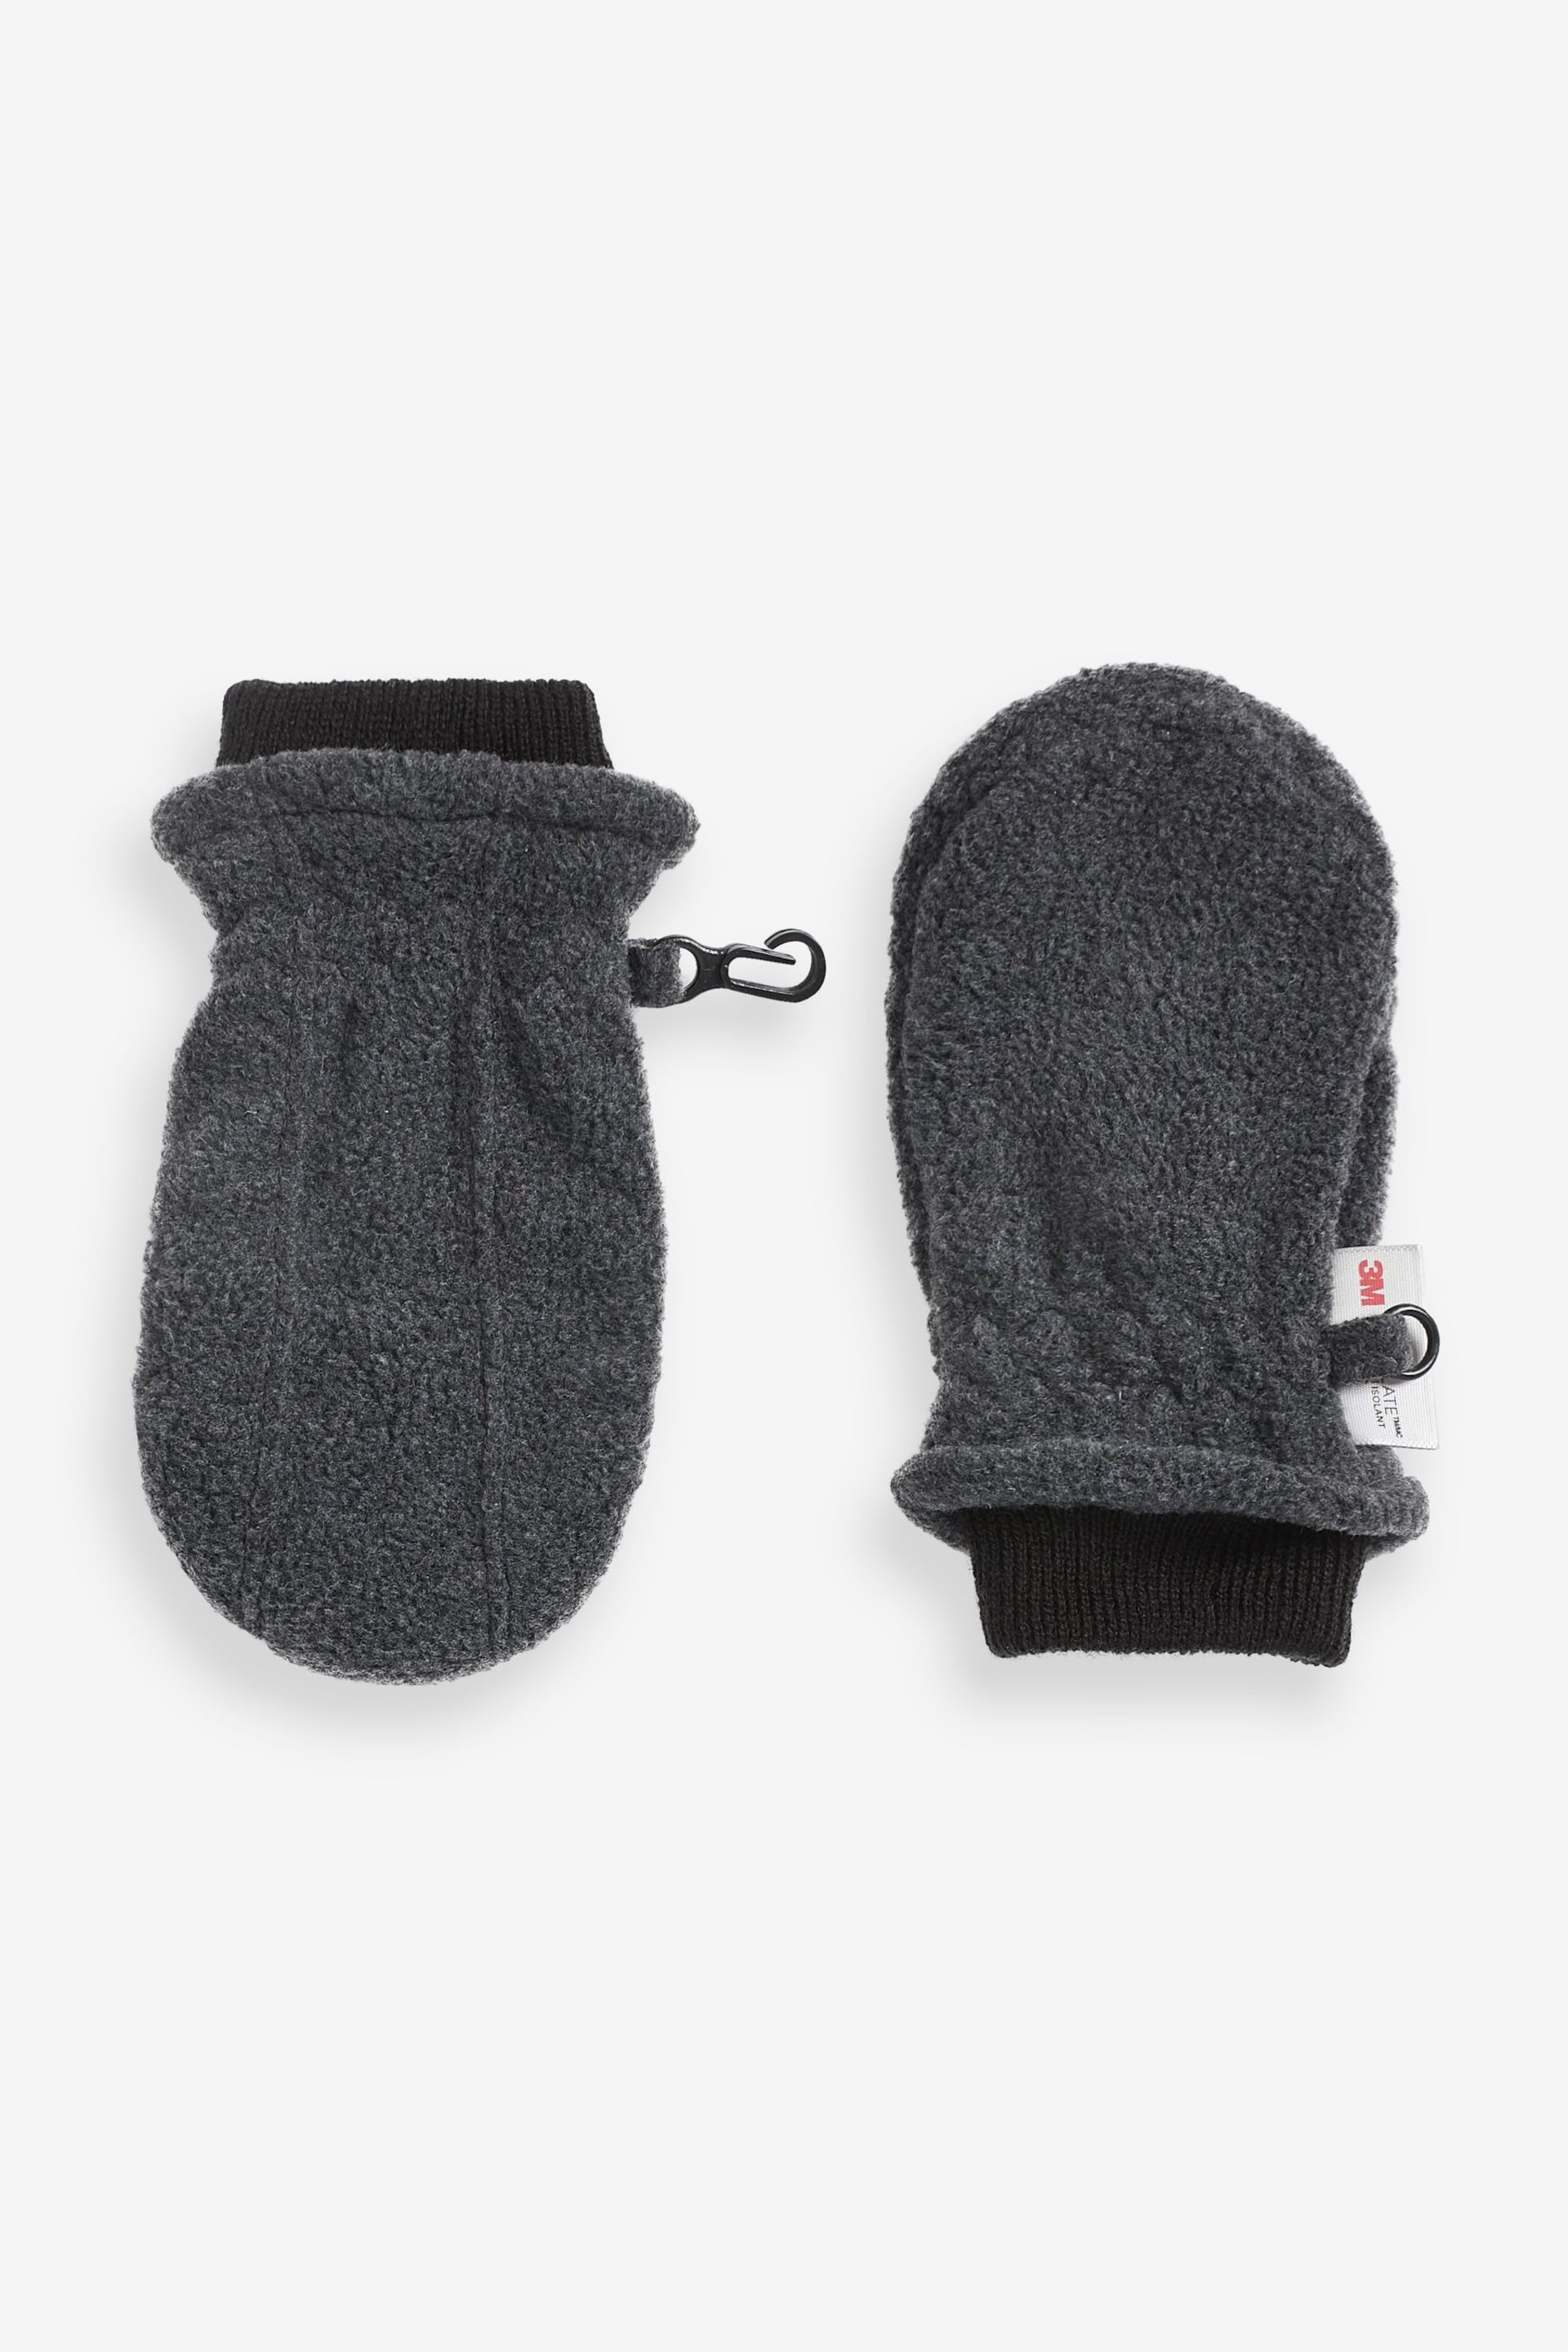 Charcoal Grey 2 Pack Fleece Mittens (3mths-6yrs) - Image 2 of 2